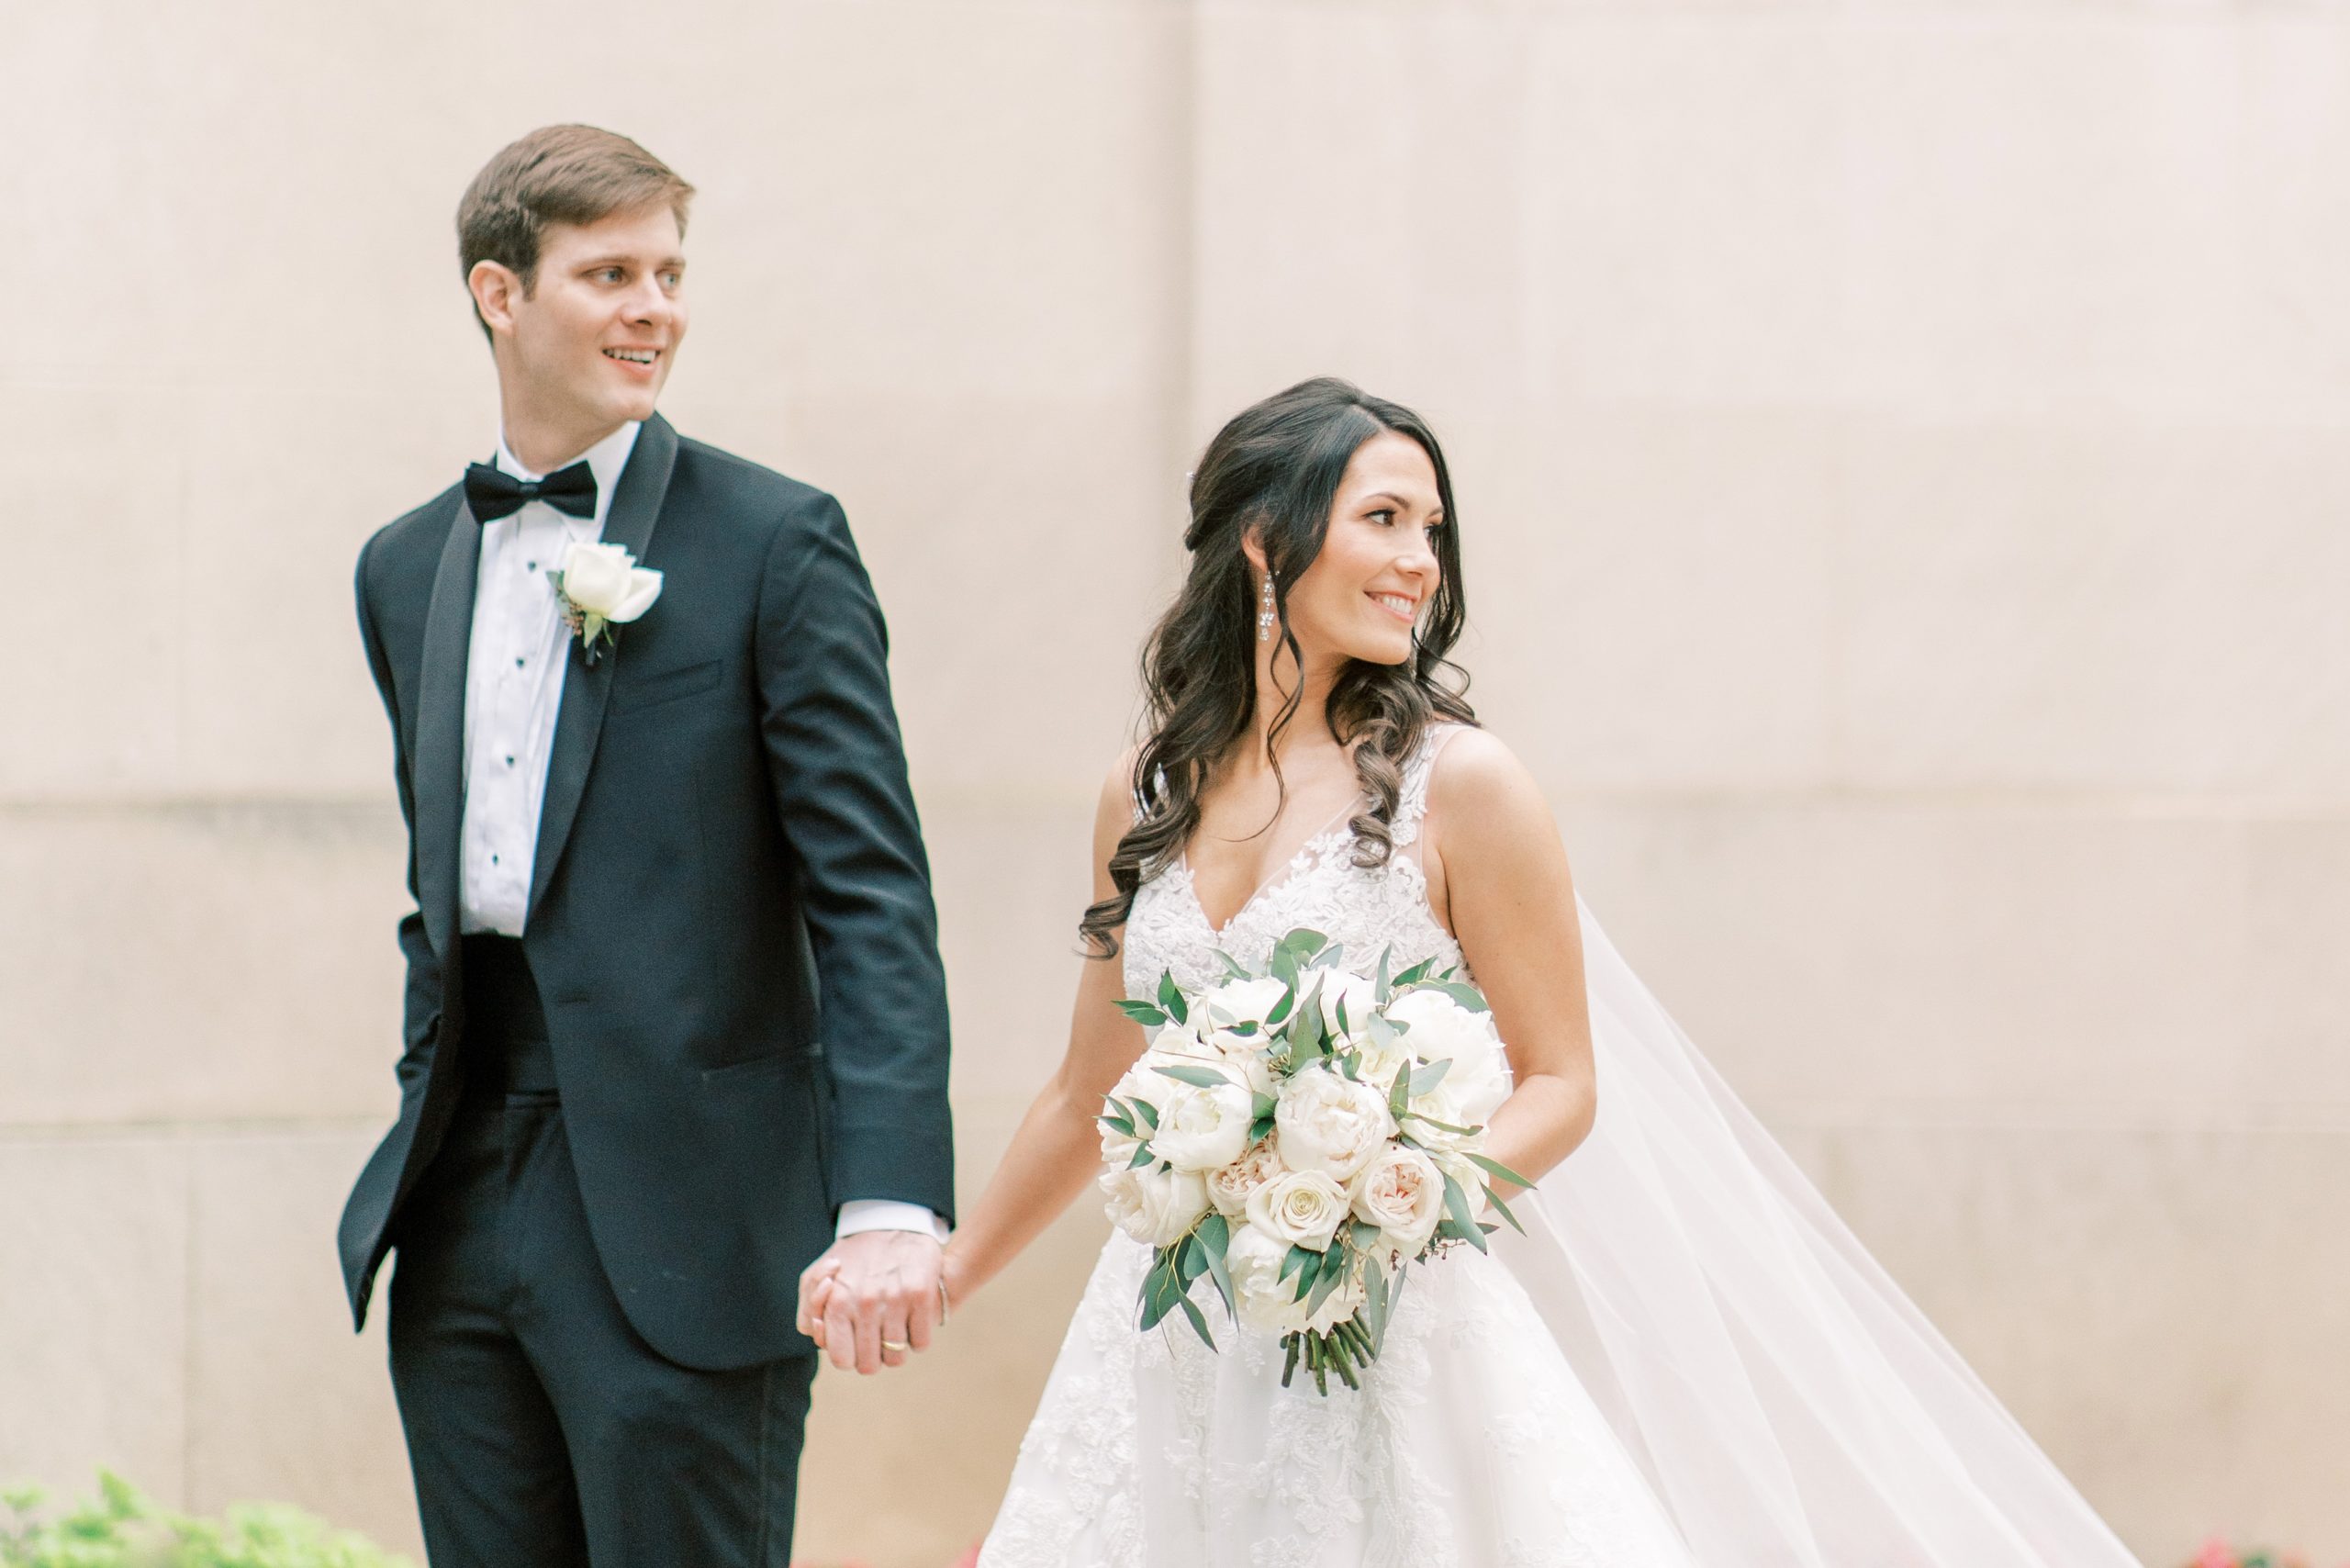 A beautiful spring Meridian House Wedding in Washington, DC photographed by film photographer Alicia Lacey.